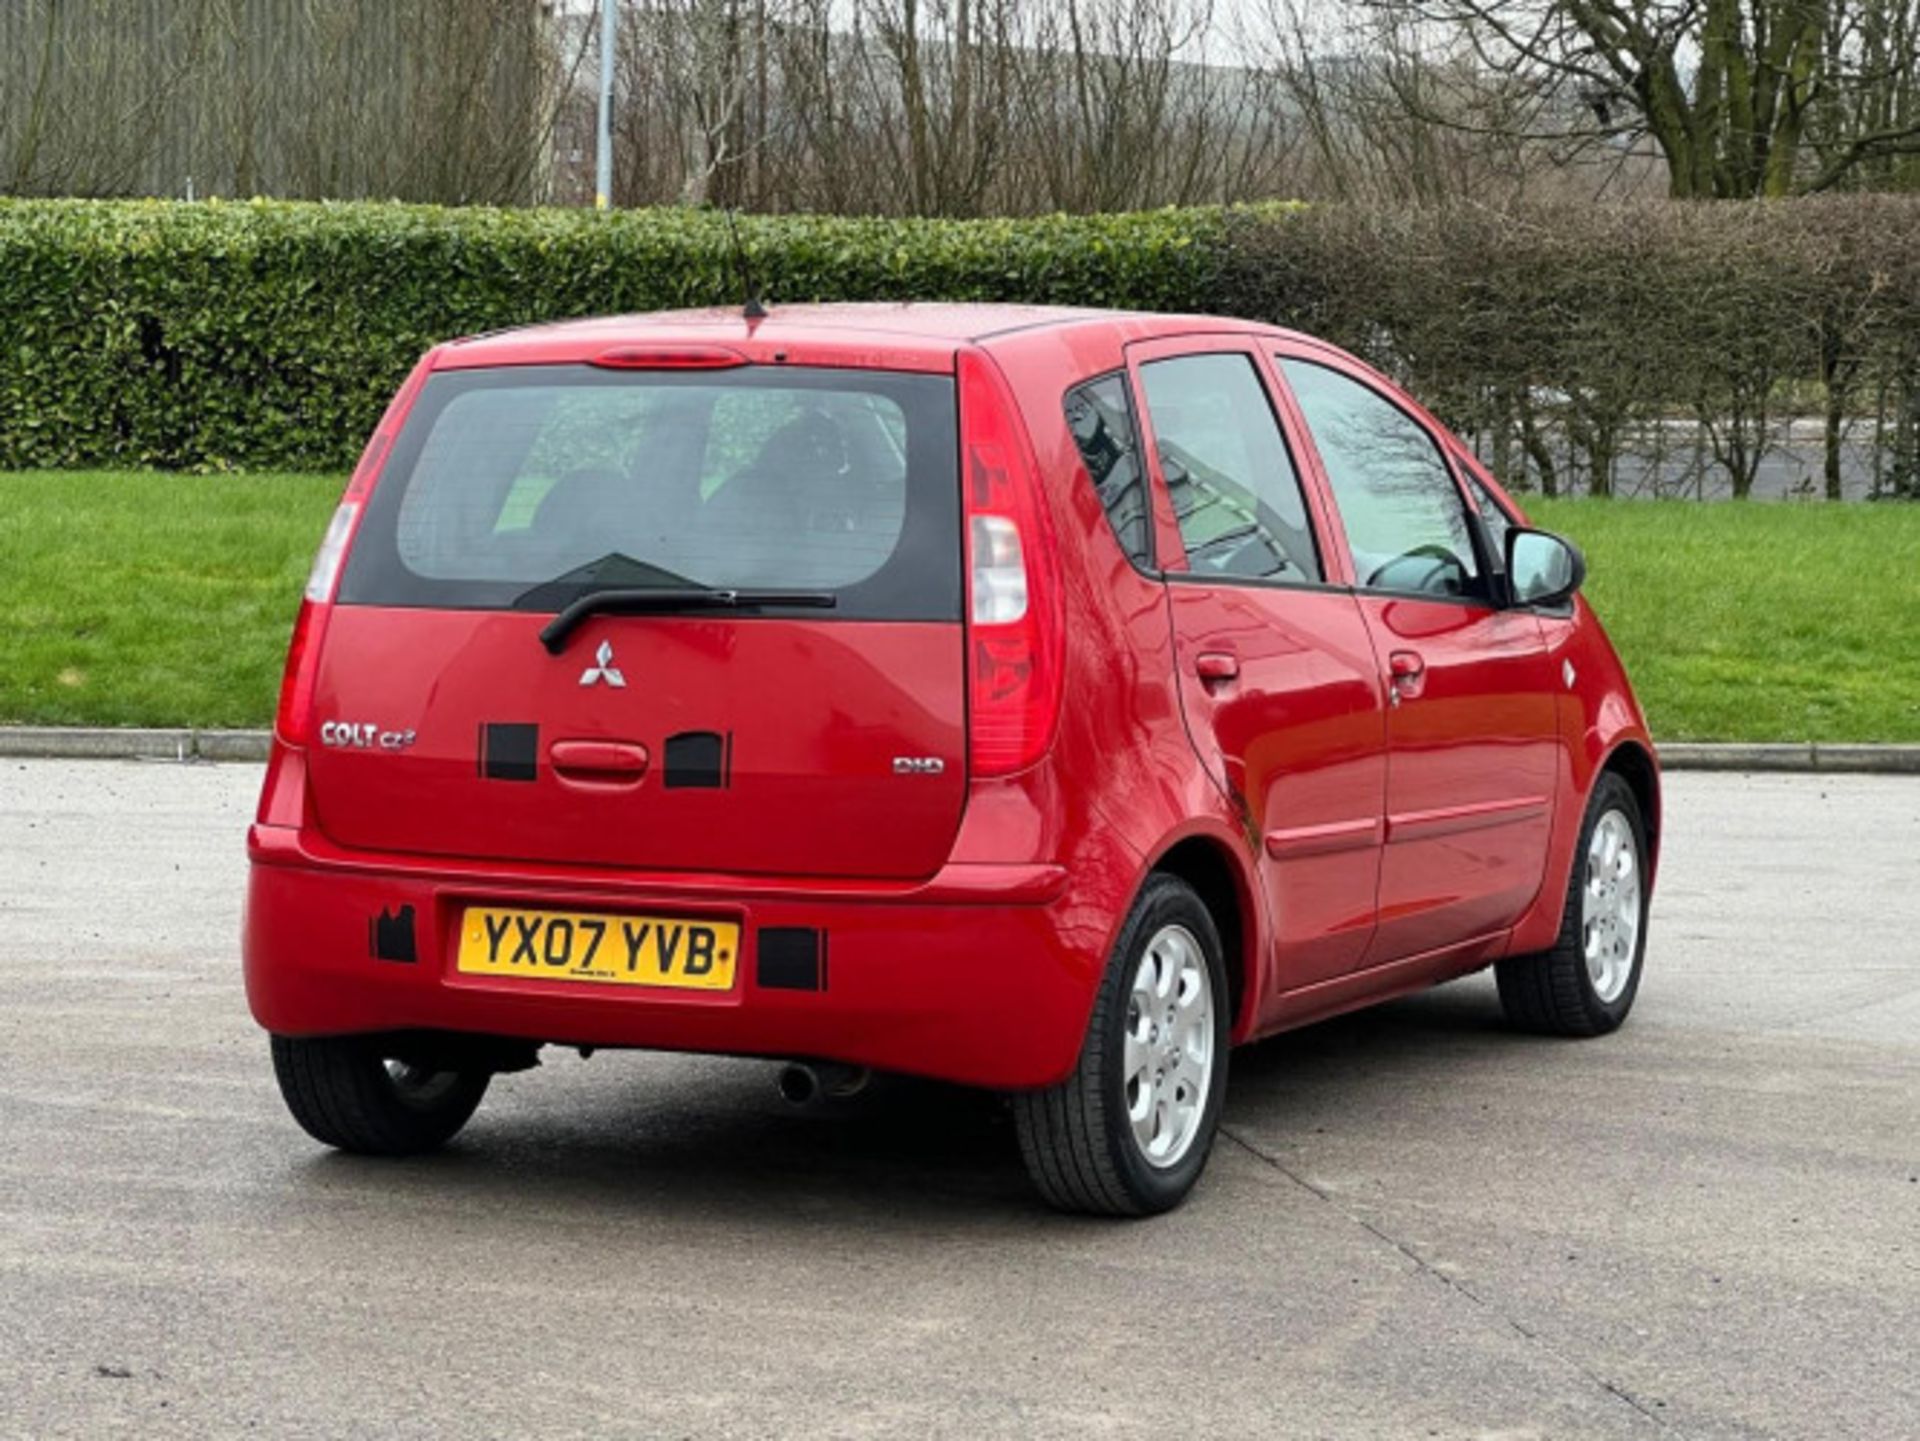 2007 MITSUBISHI COLT 1.5 DI-D DIESEL AUTOMATIC >>--NO VAT ON HAMMER--<< - Image 126 of 127